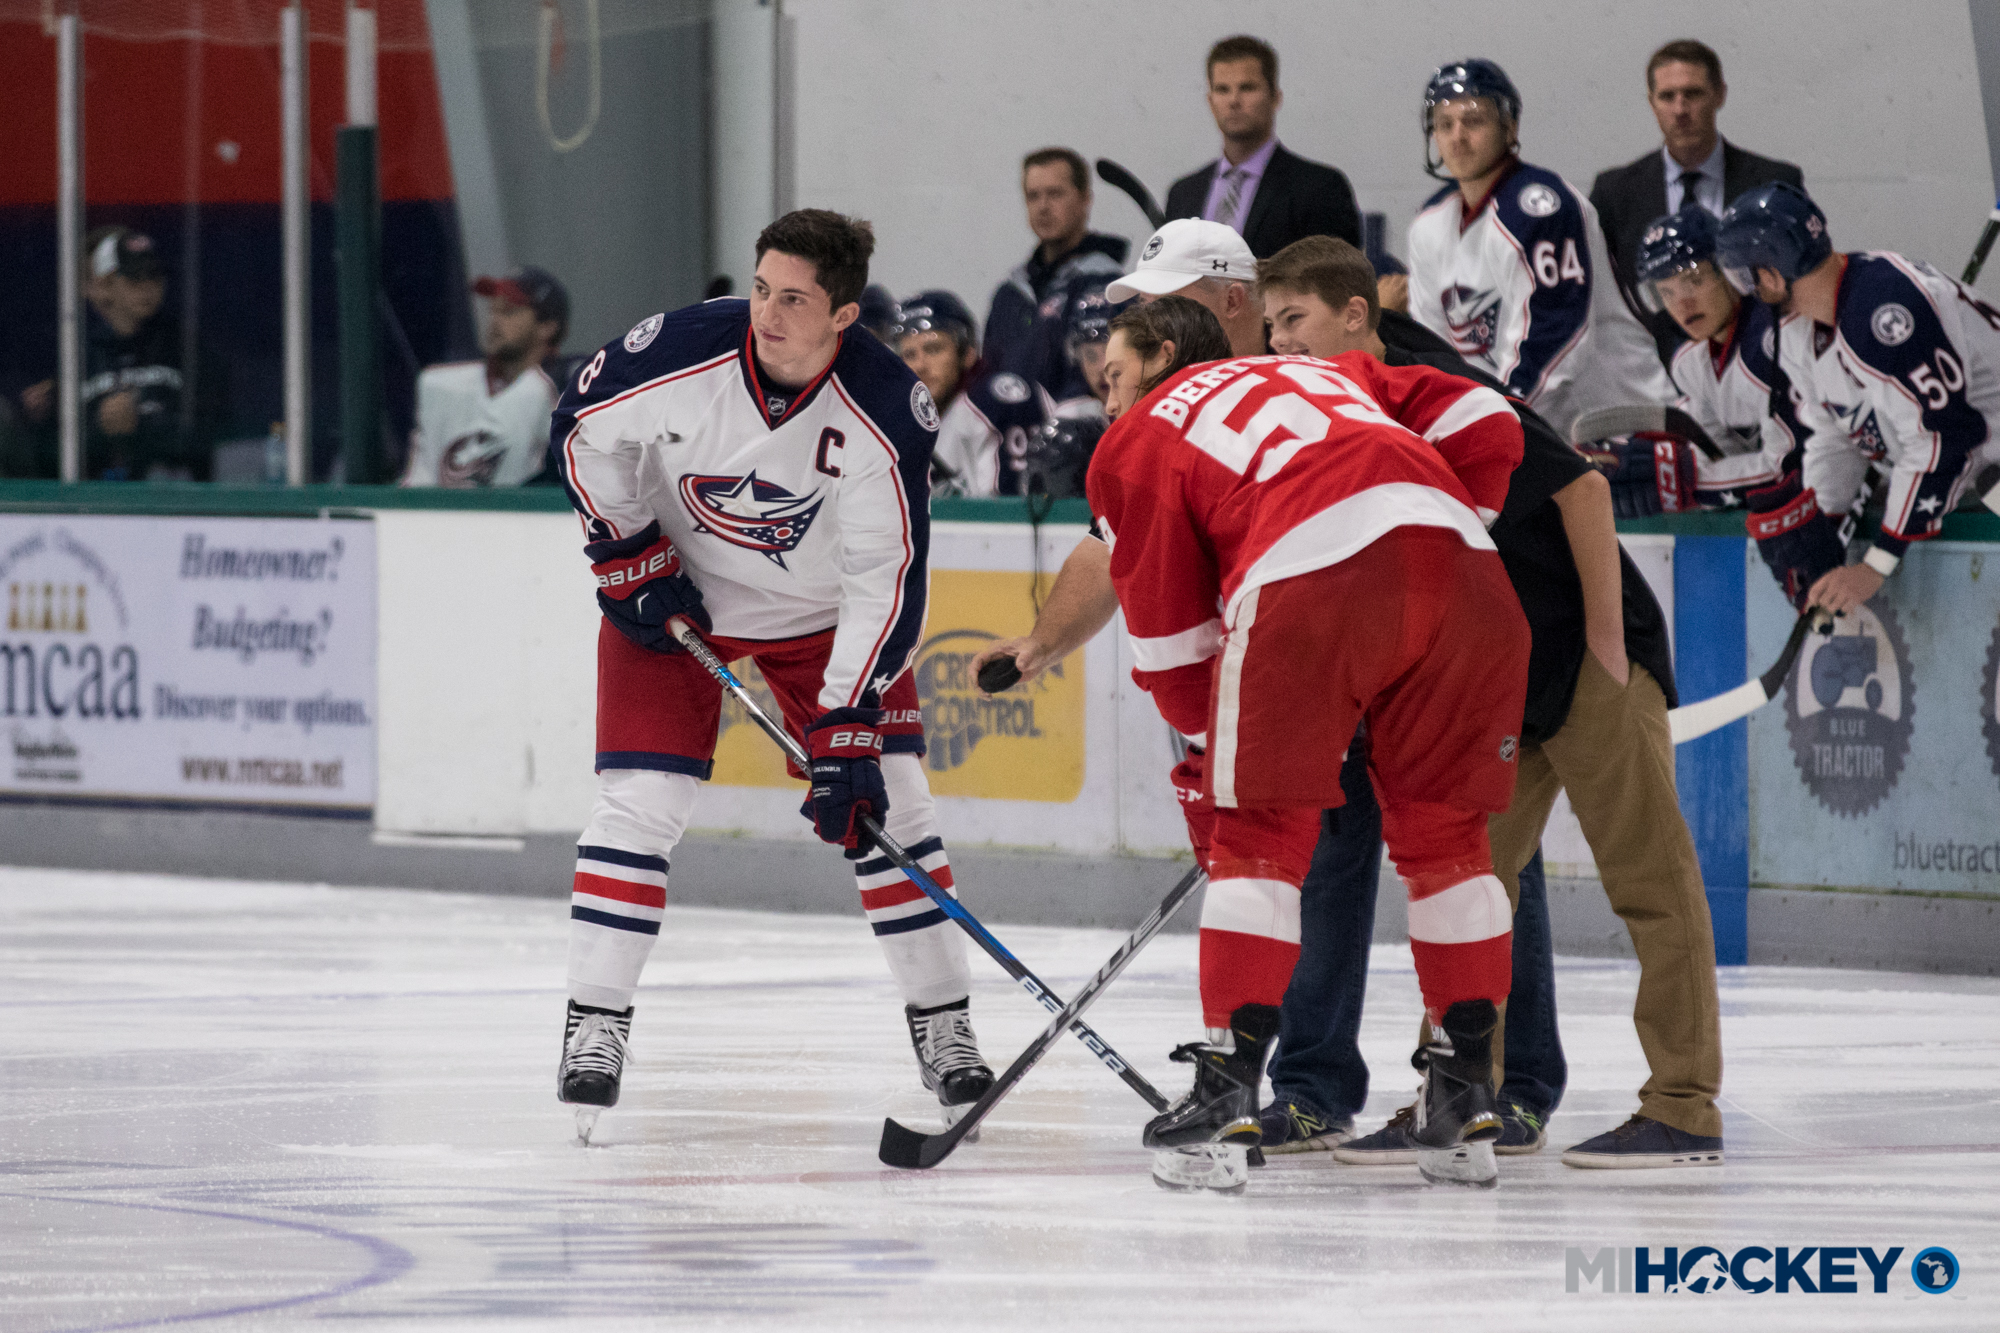 PHOTOS: 2016 NHL Prospect Tournament in 